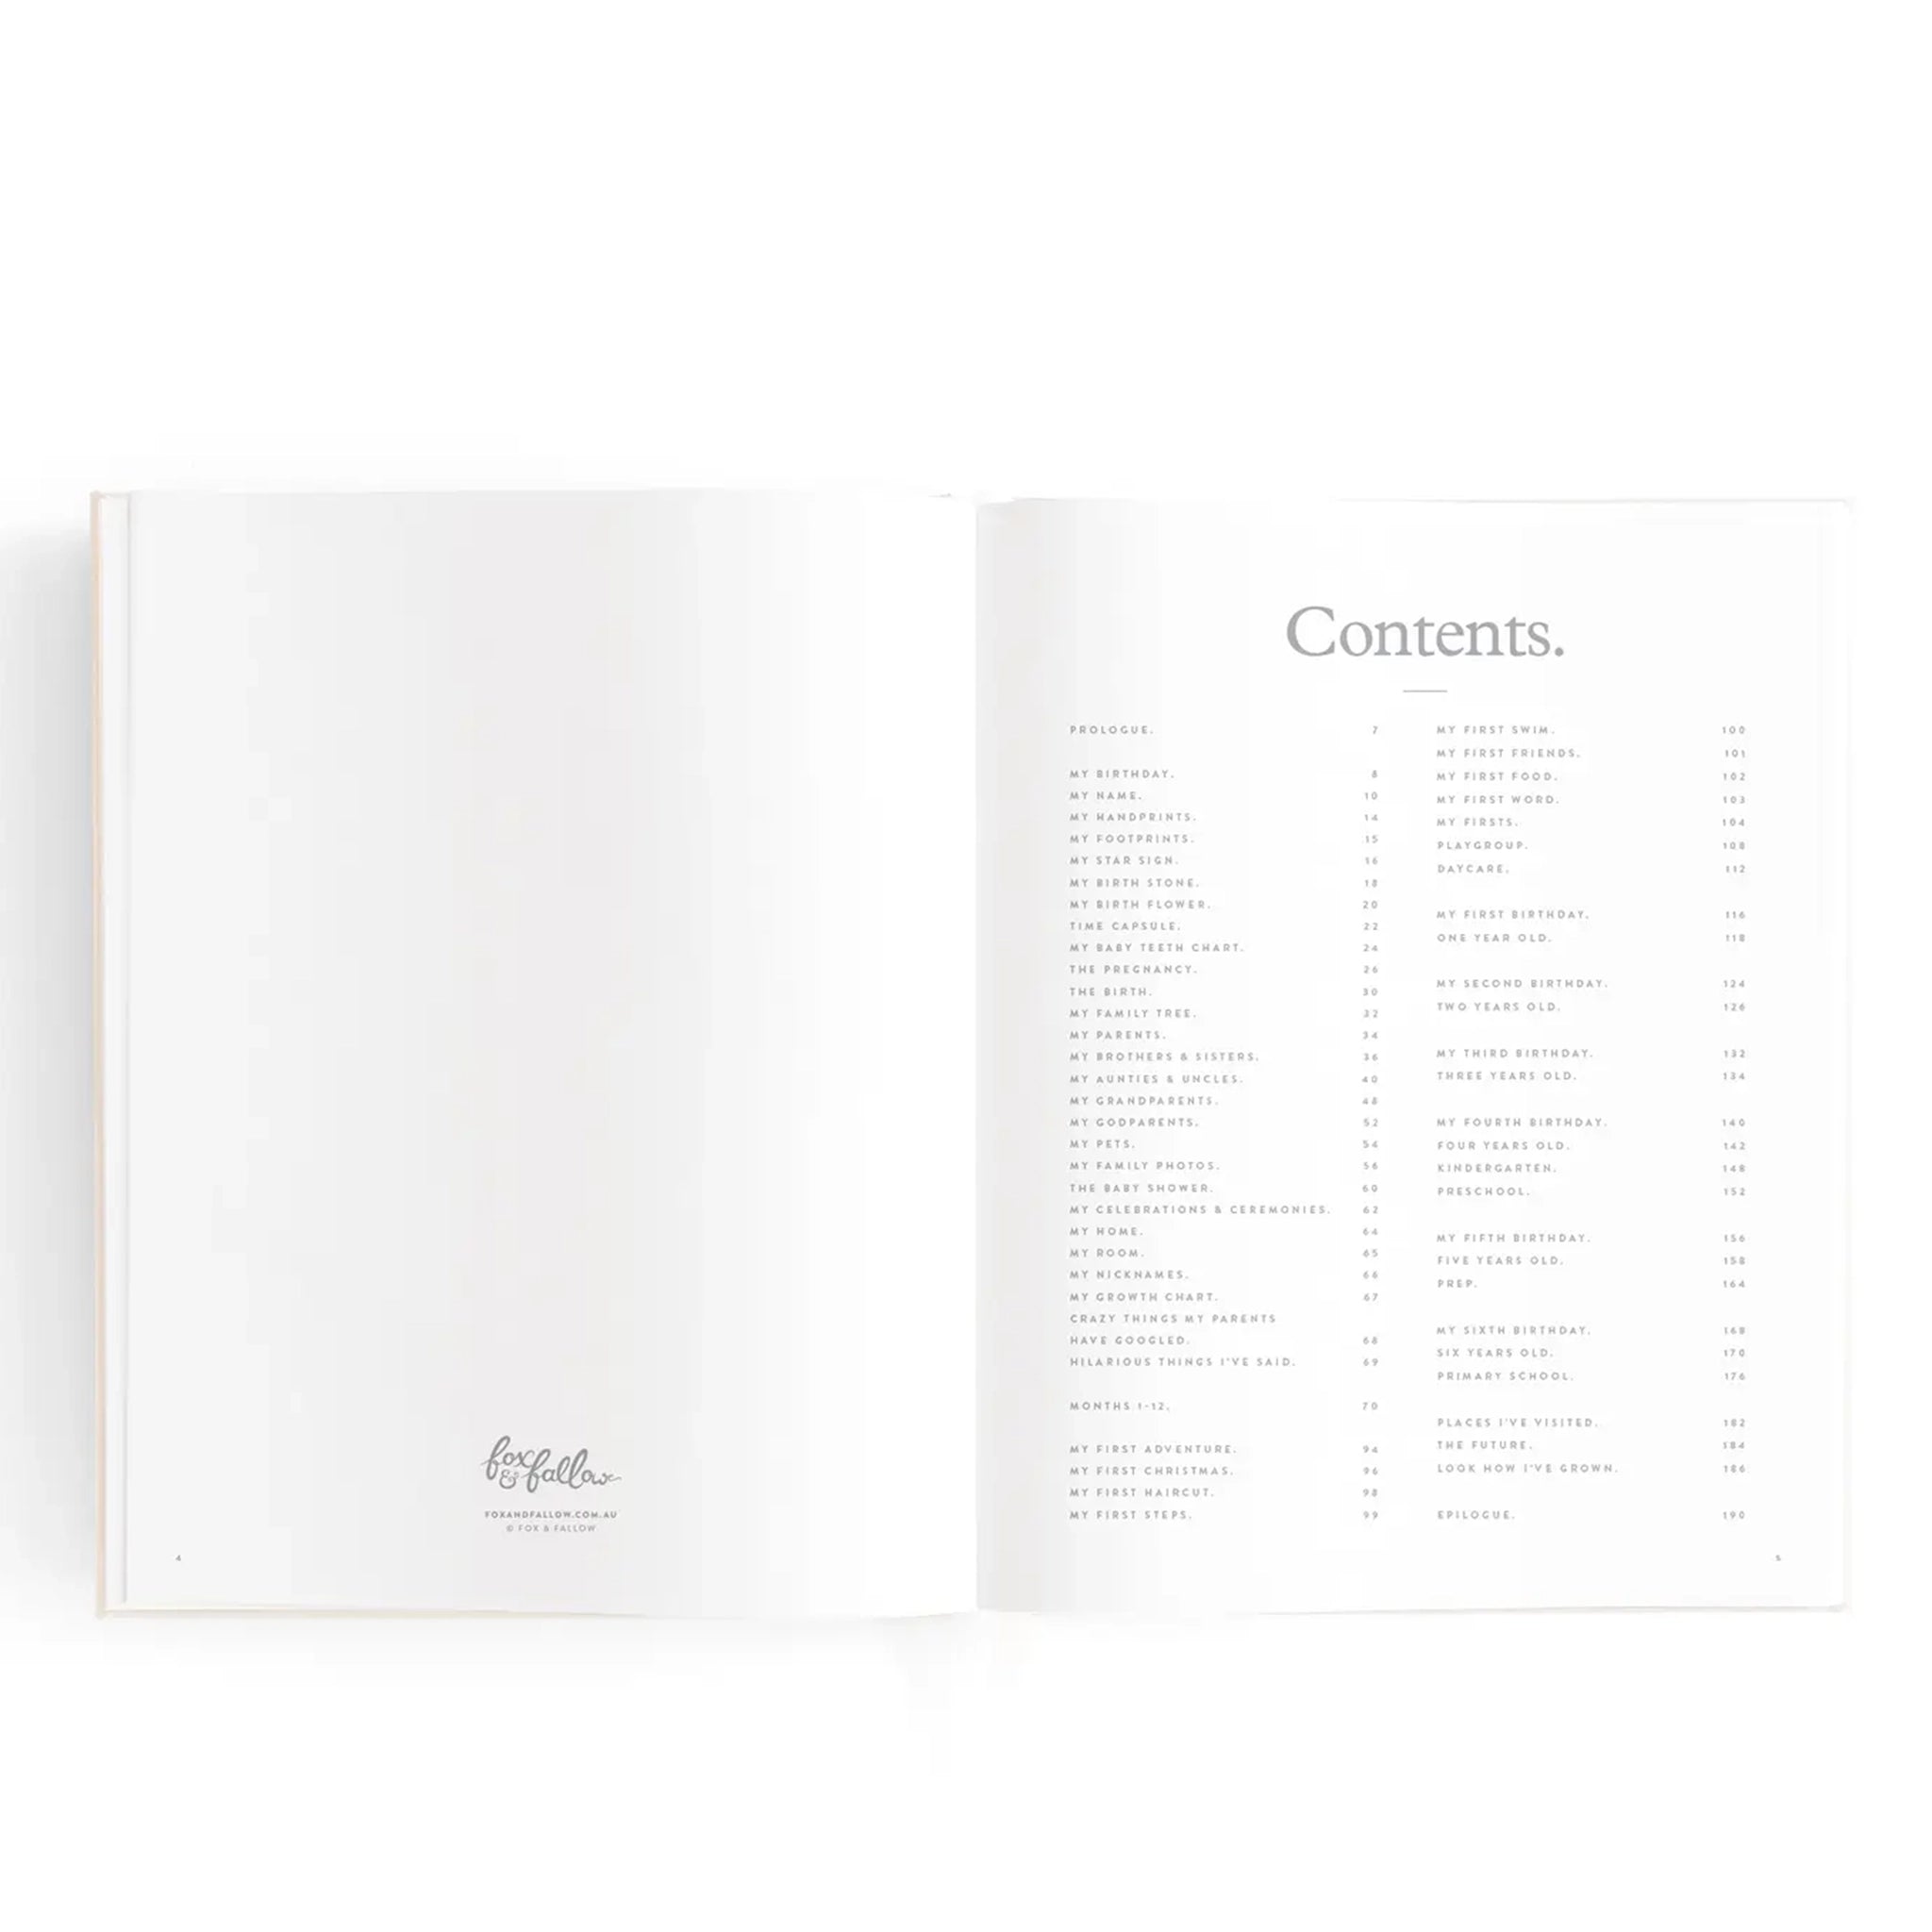 The interior of the book opened to the table of contents page.